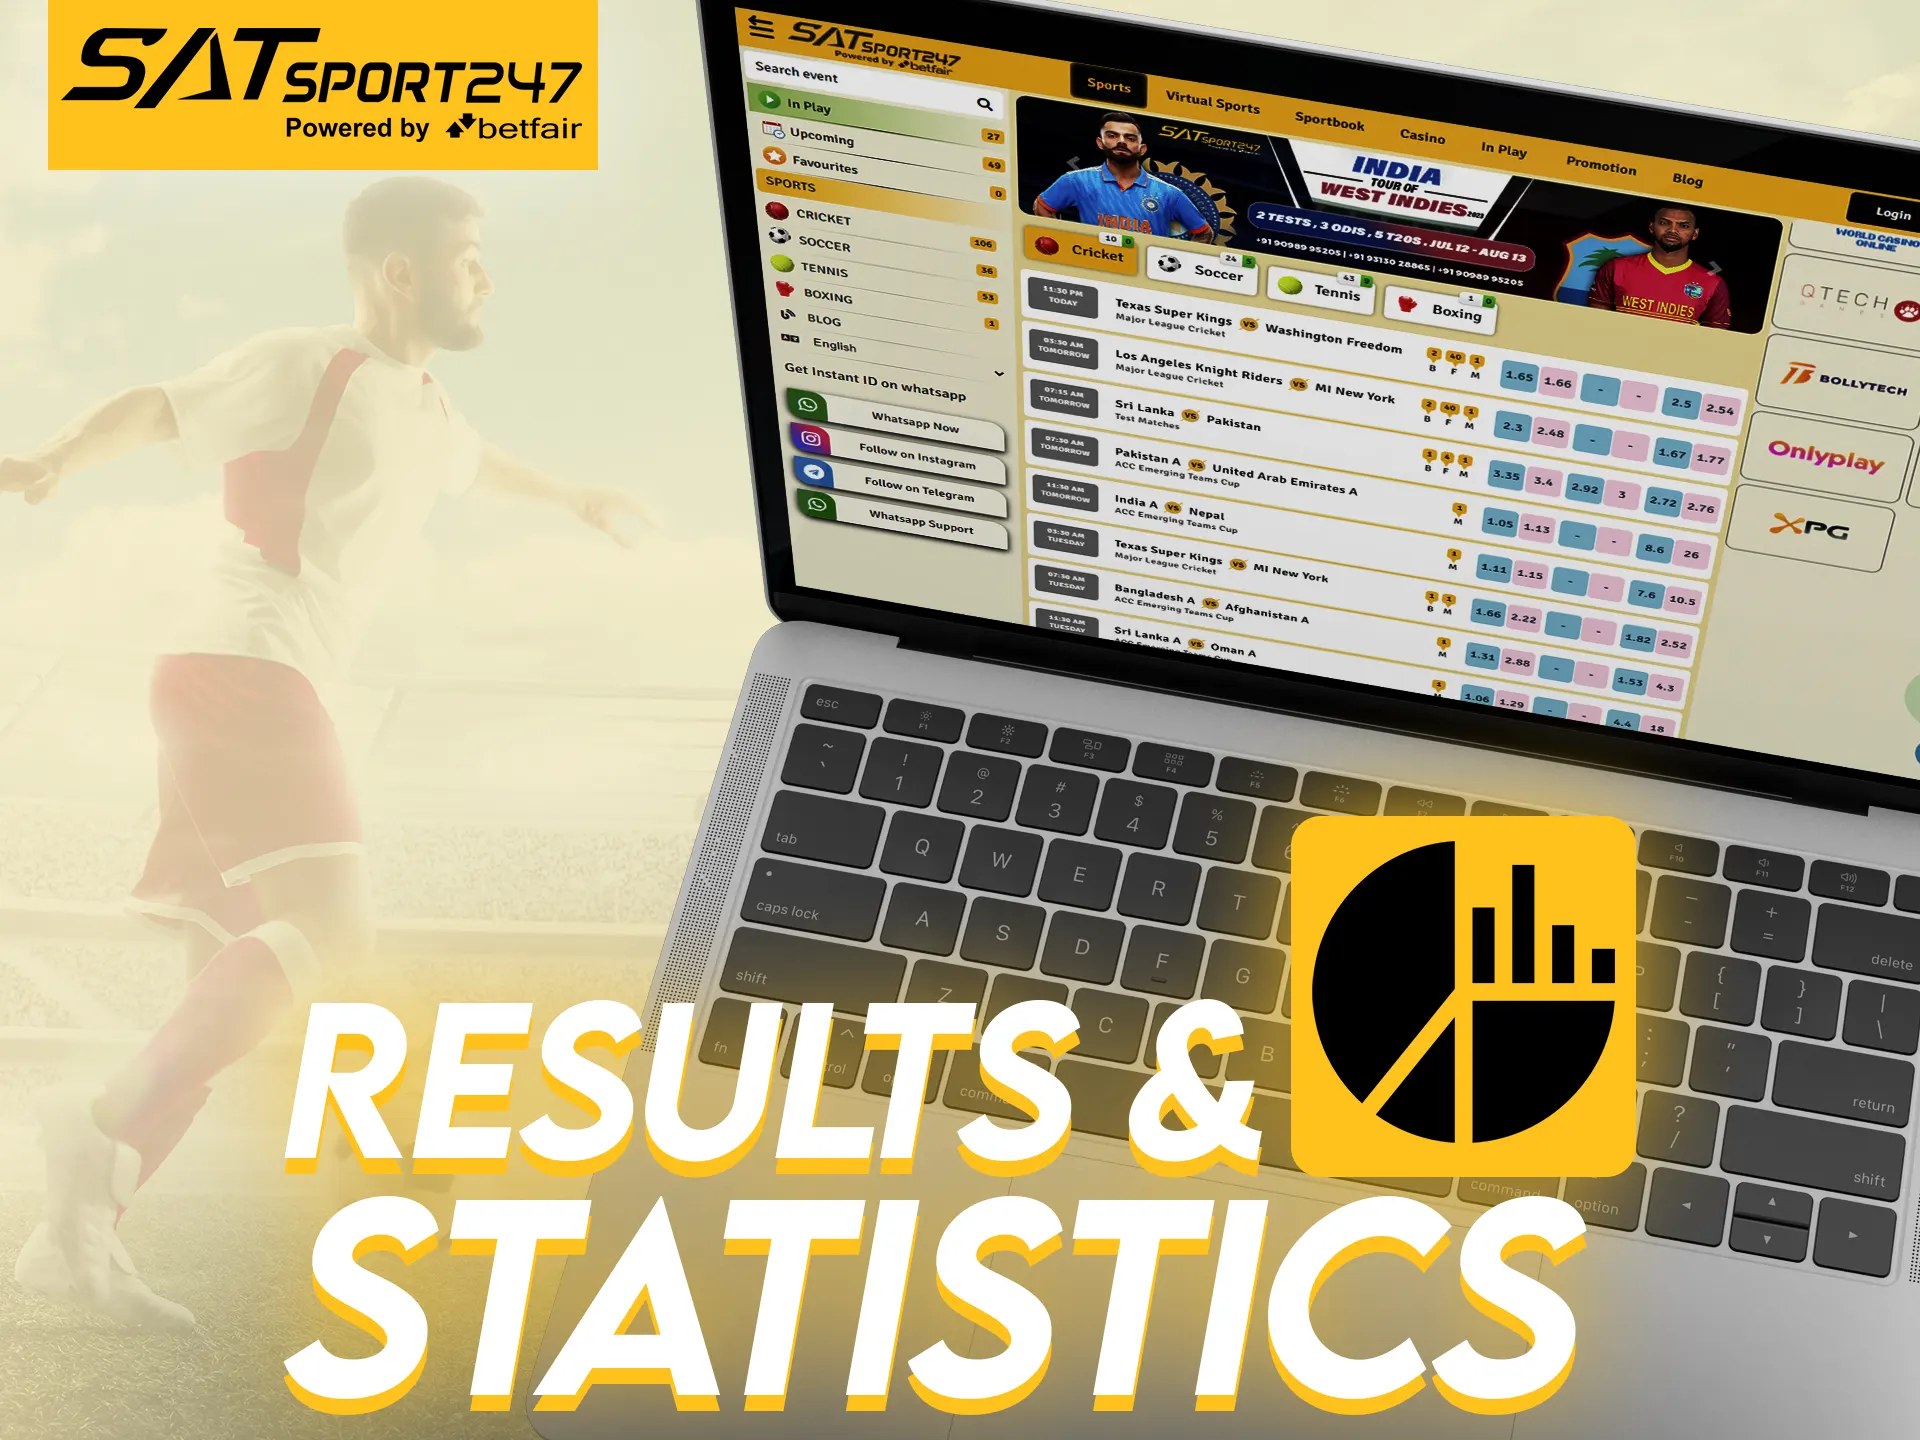 Follow the results and match statistics on Satsport247.